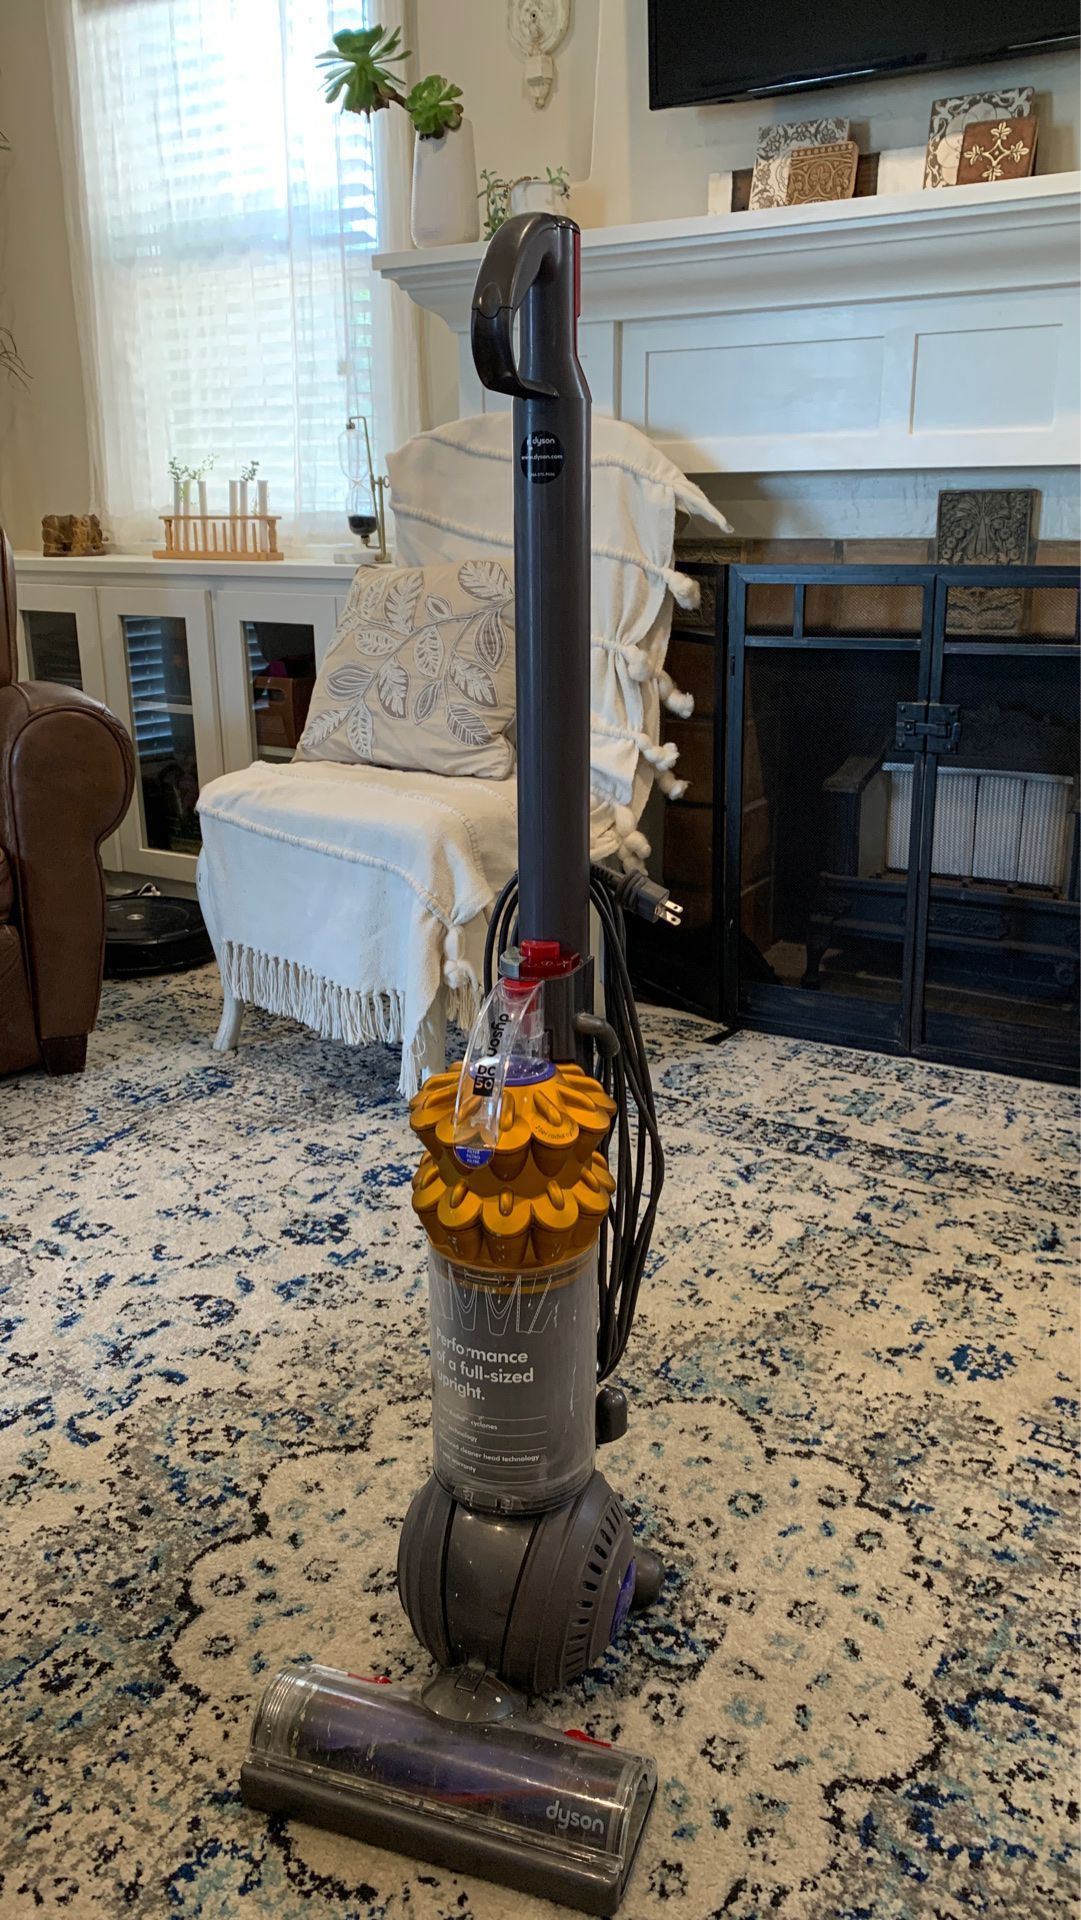 Dyson Vacuum Cleaner: Can be used for parts